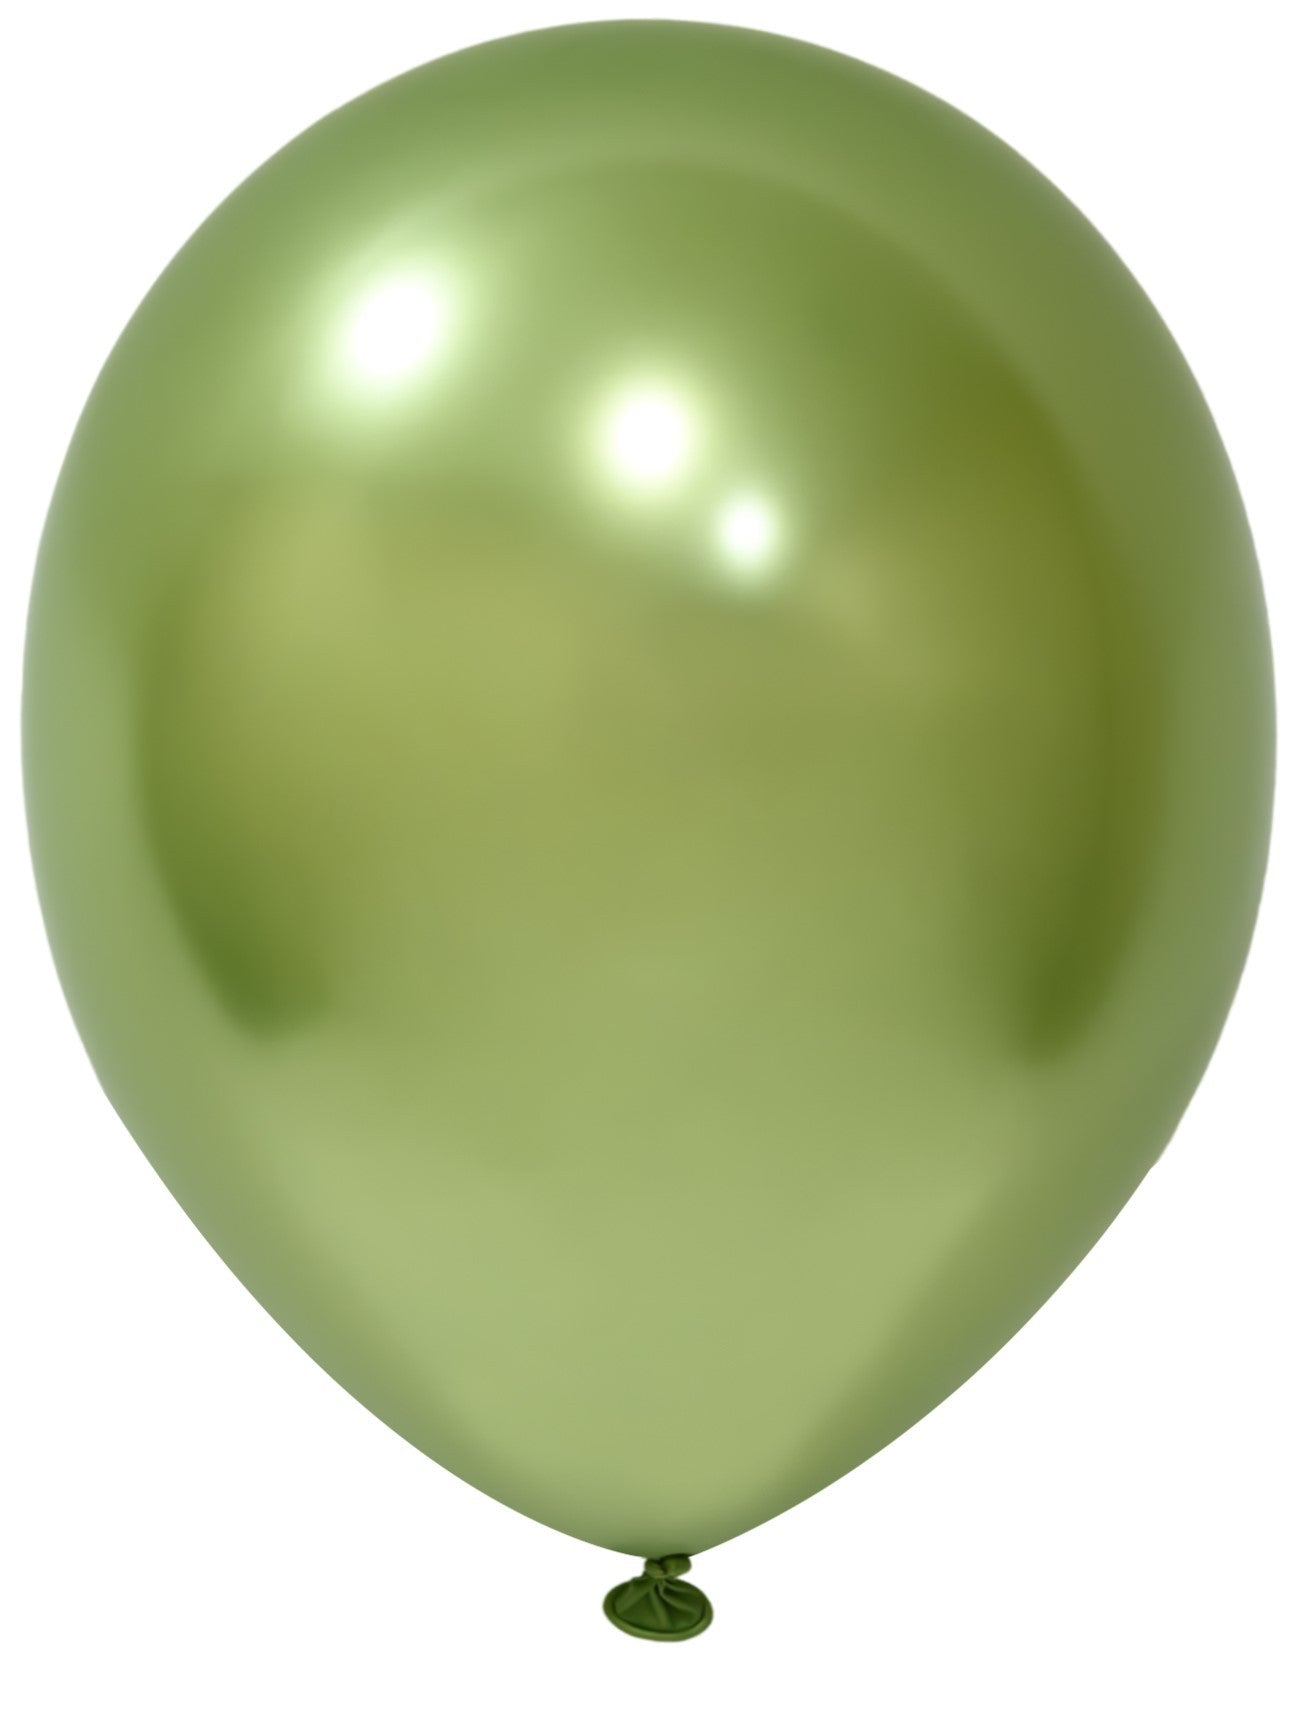 View Light Green Chrome Latex Balloon 10inch Pack of 50 information